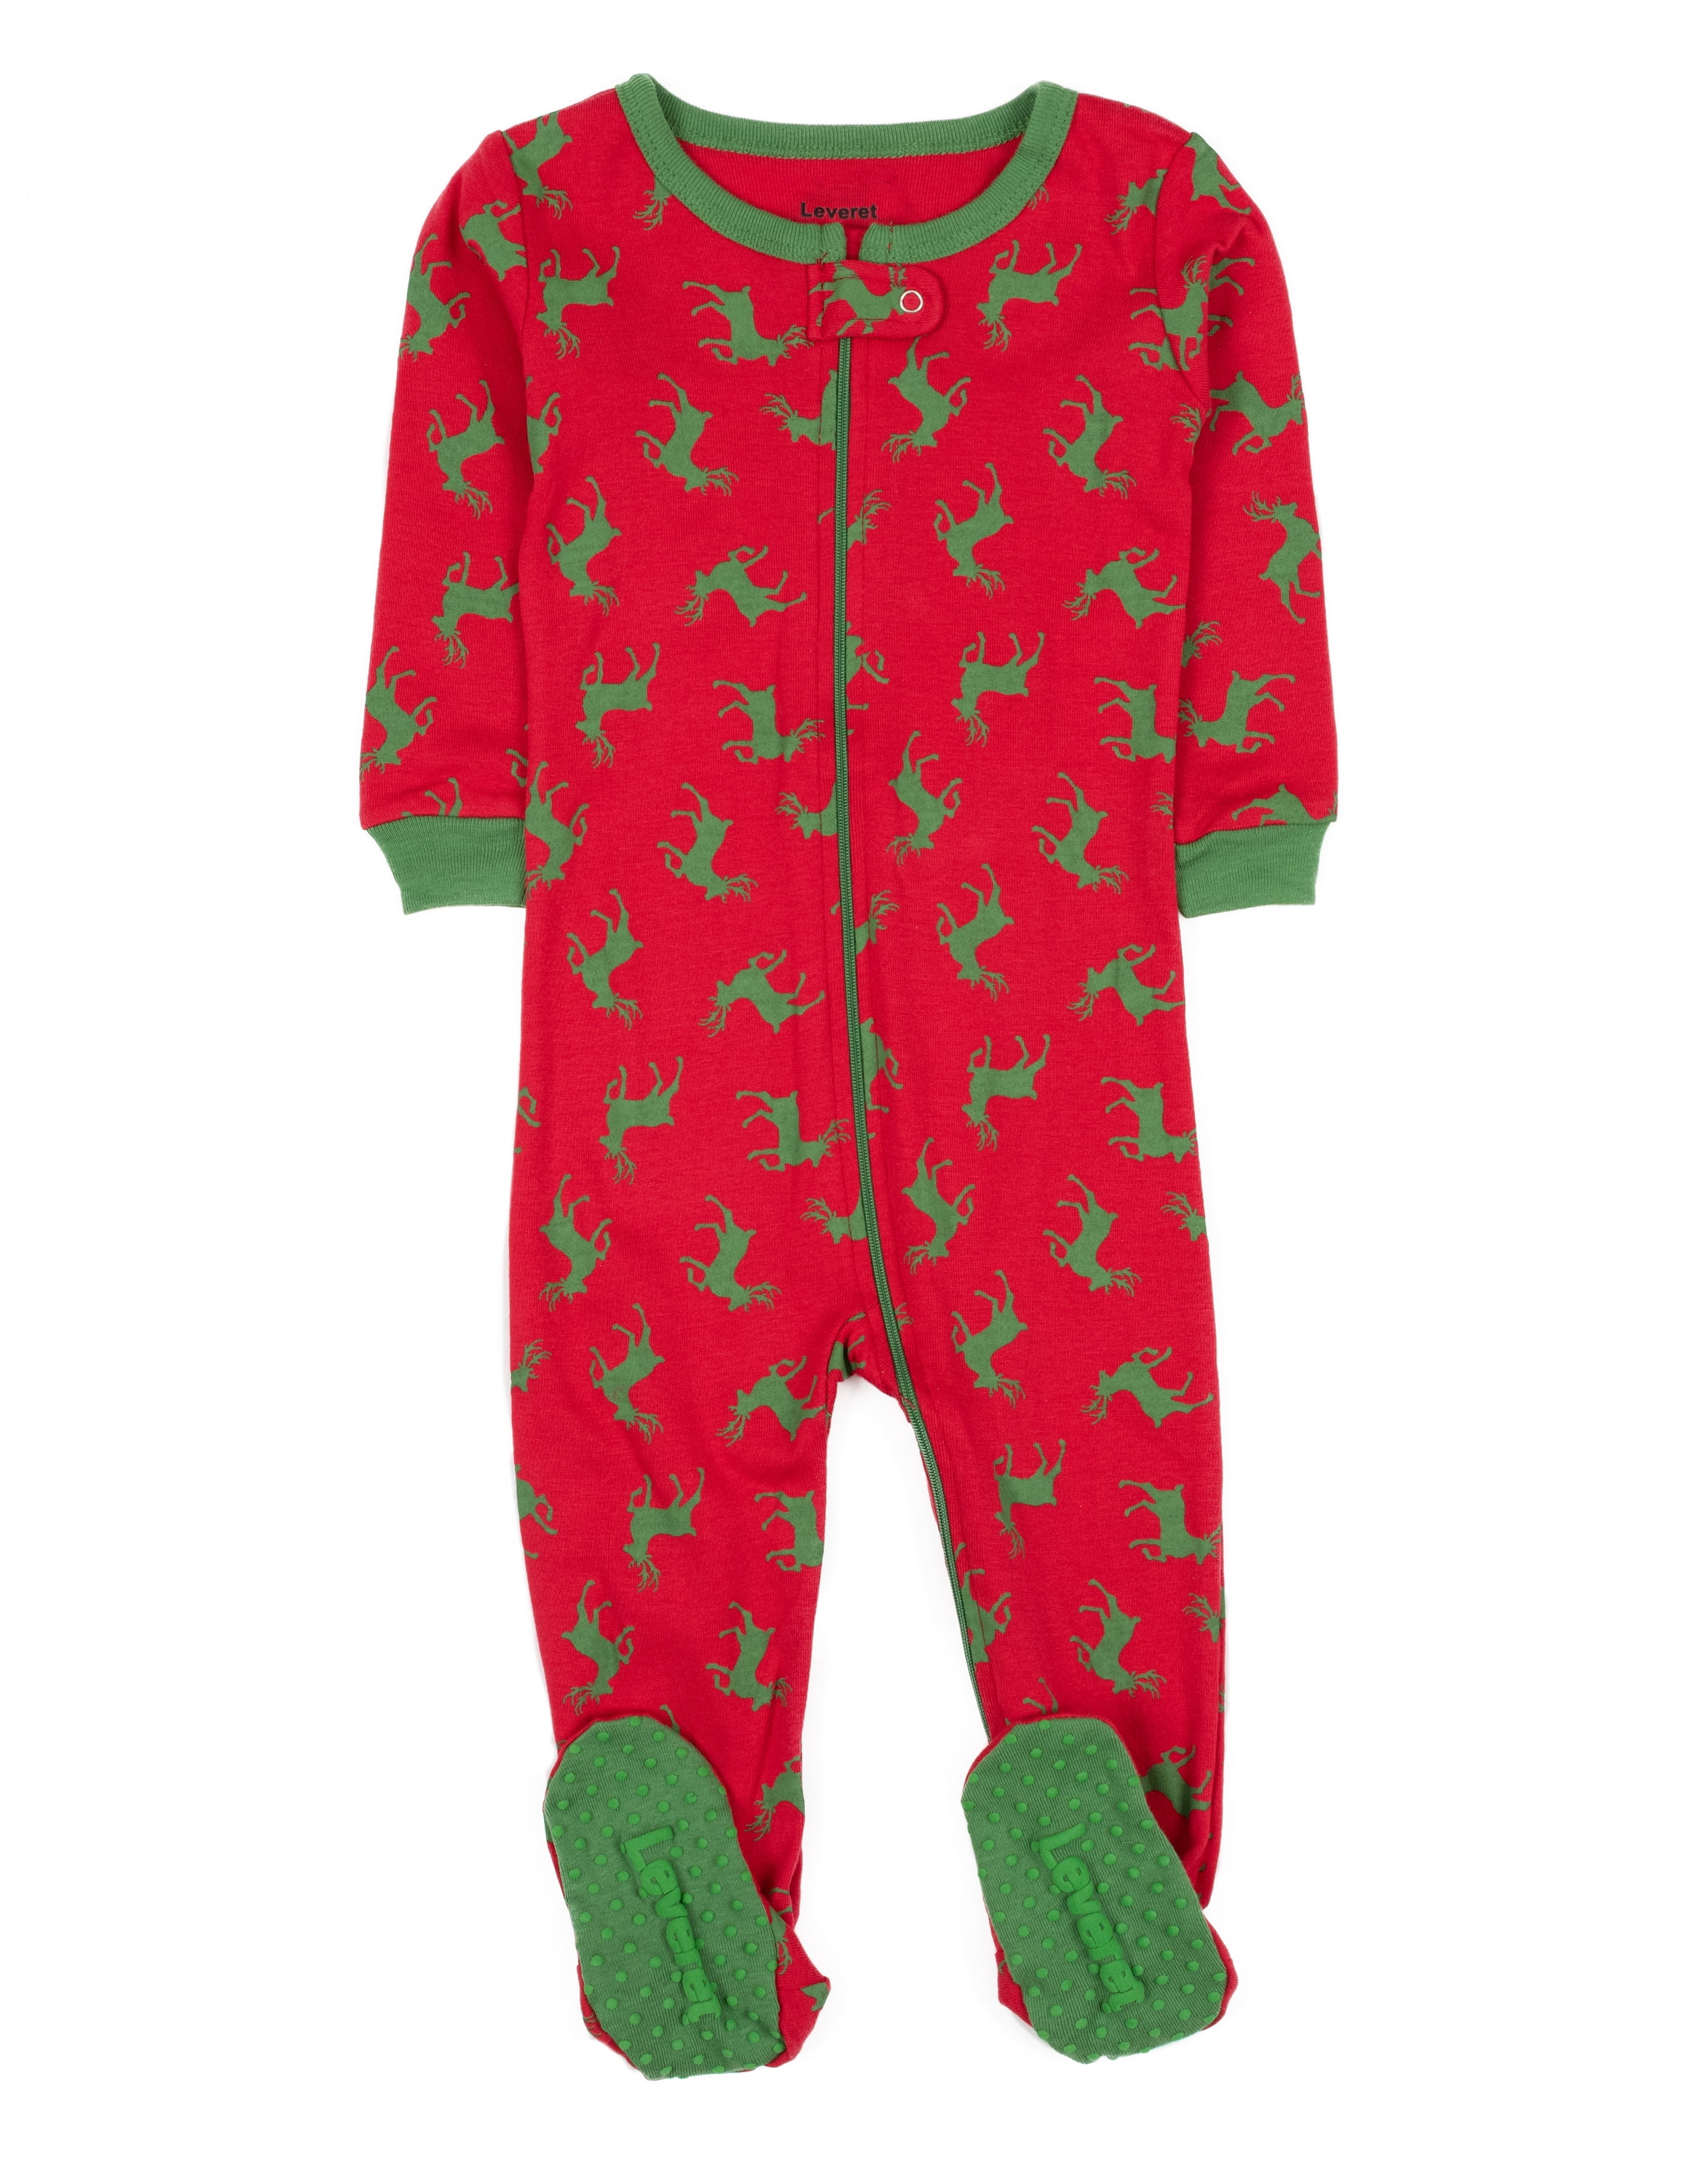 Details about   Toddler Girls Carter's Snowflakes & Raindeer Fleece Footed Pajamas Sizes 2T 5T 